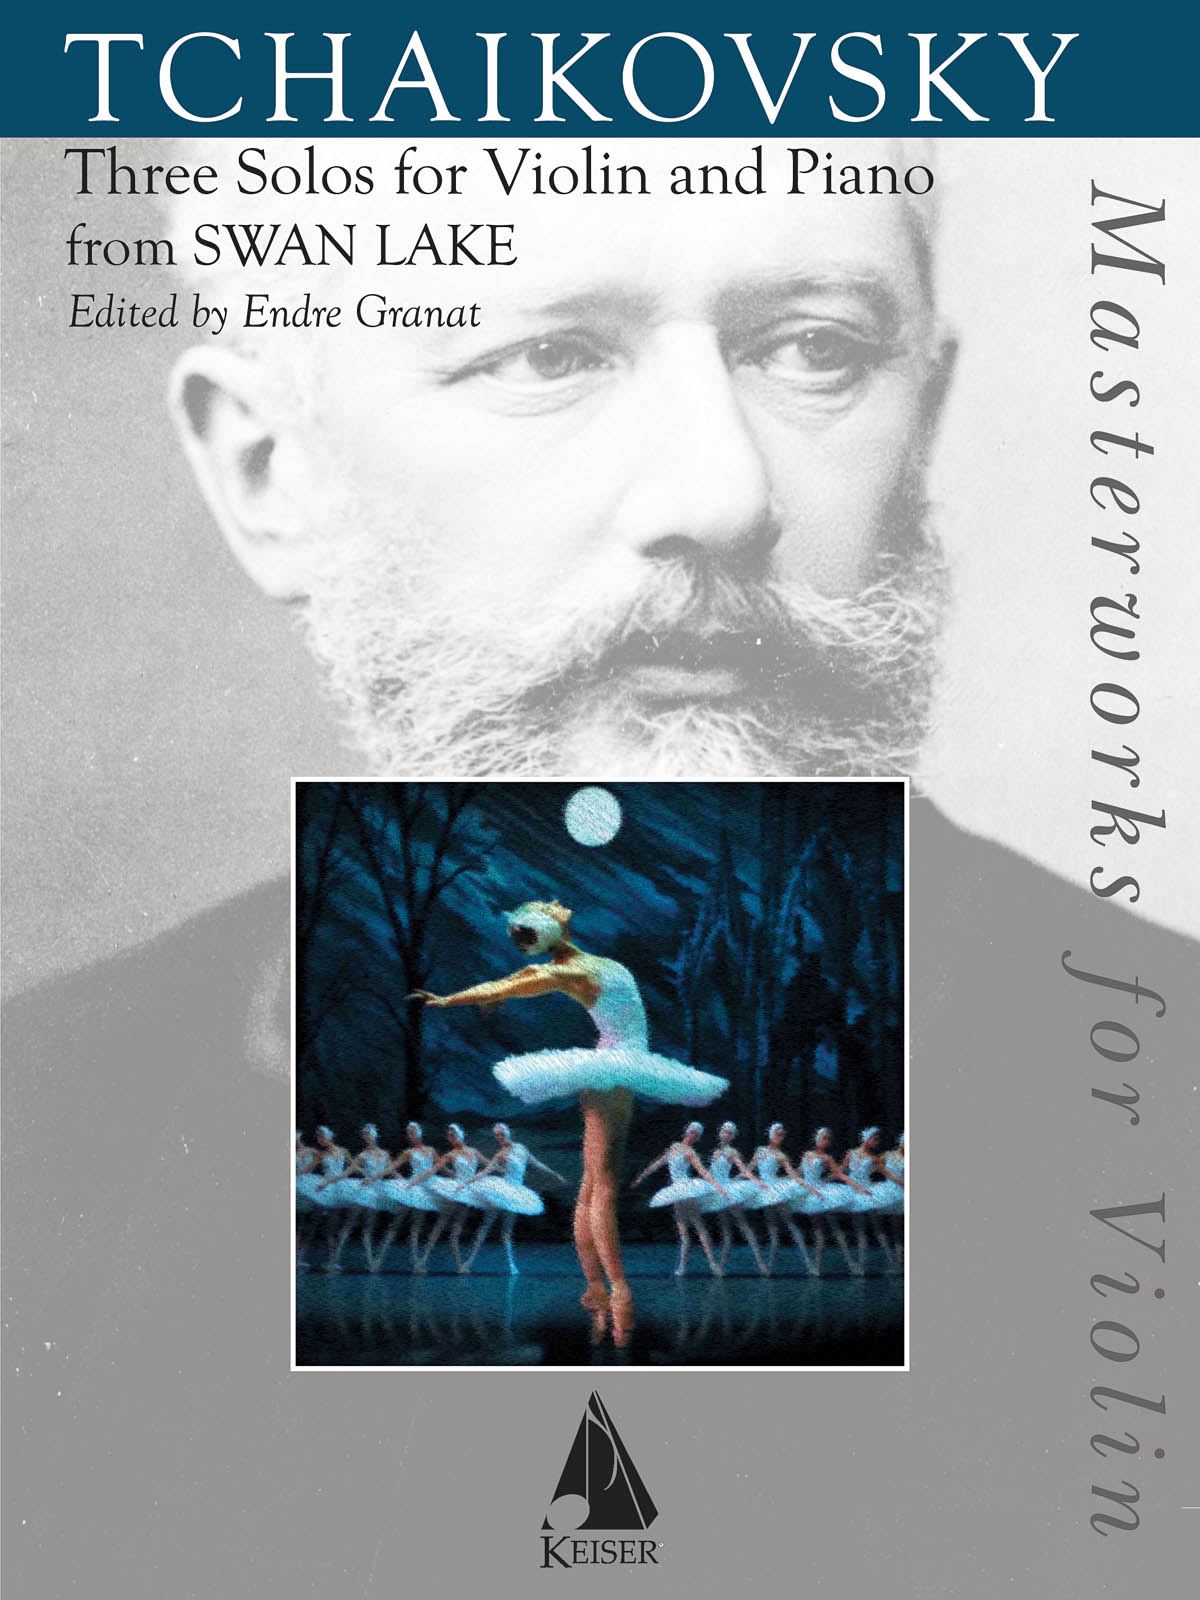 Pyotr Ilyich Tchaikovsky: Three Solos for Violin and Piano from Swan Lake: